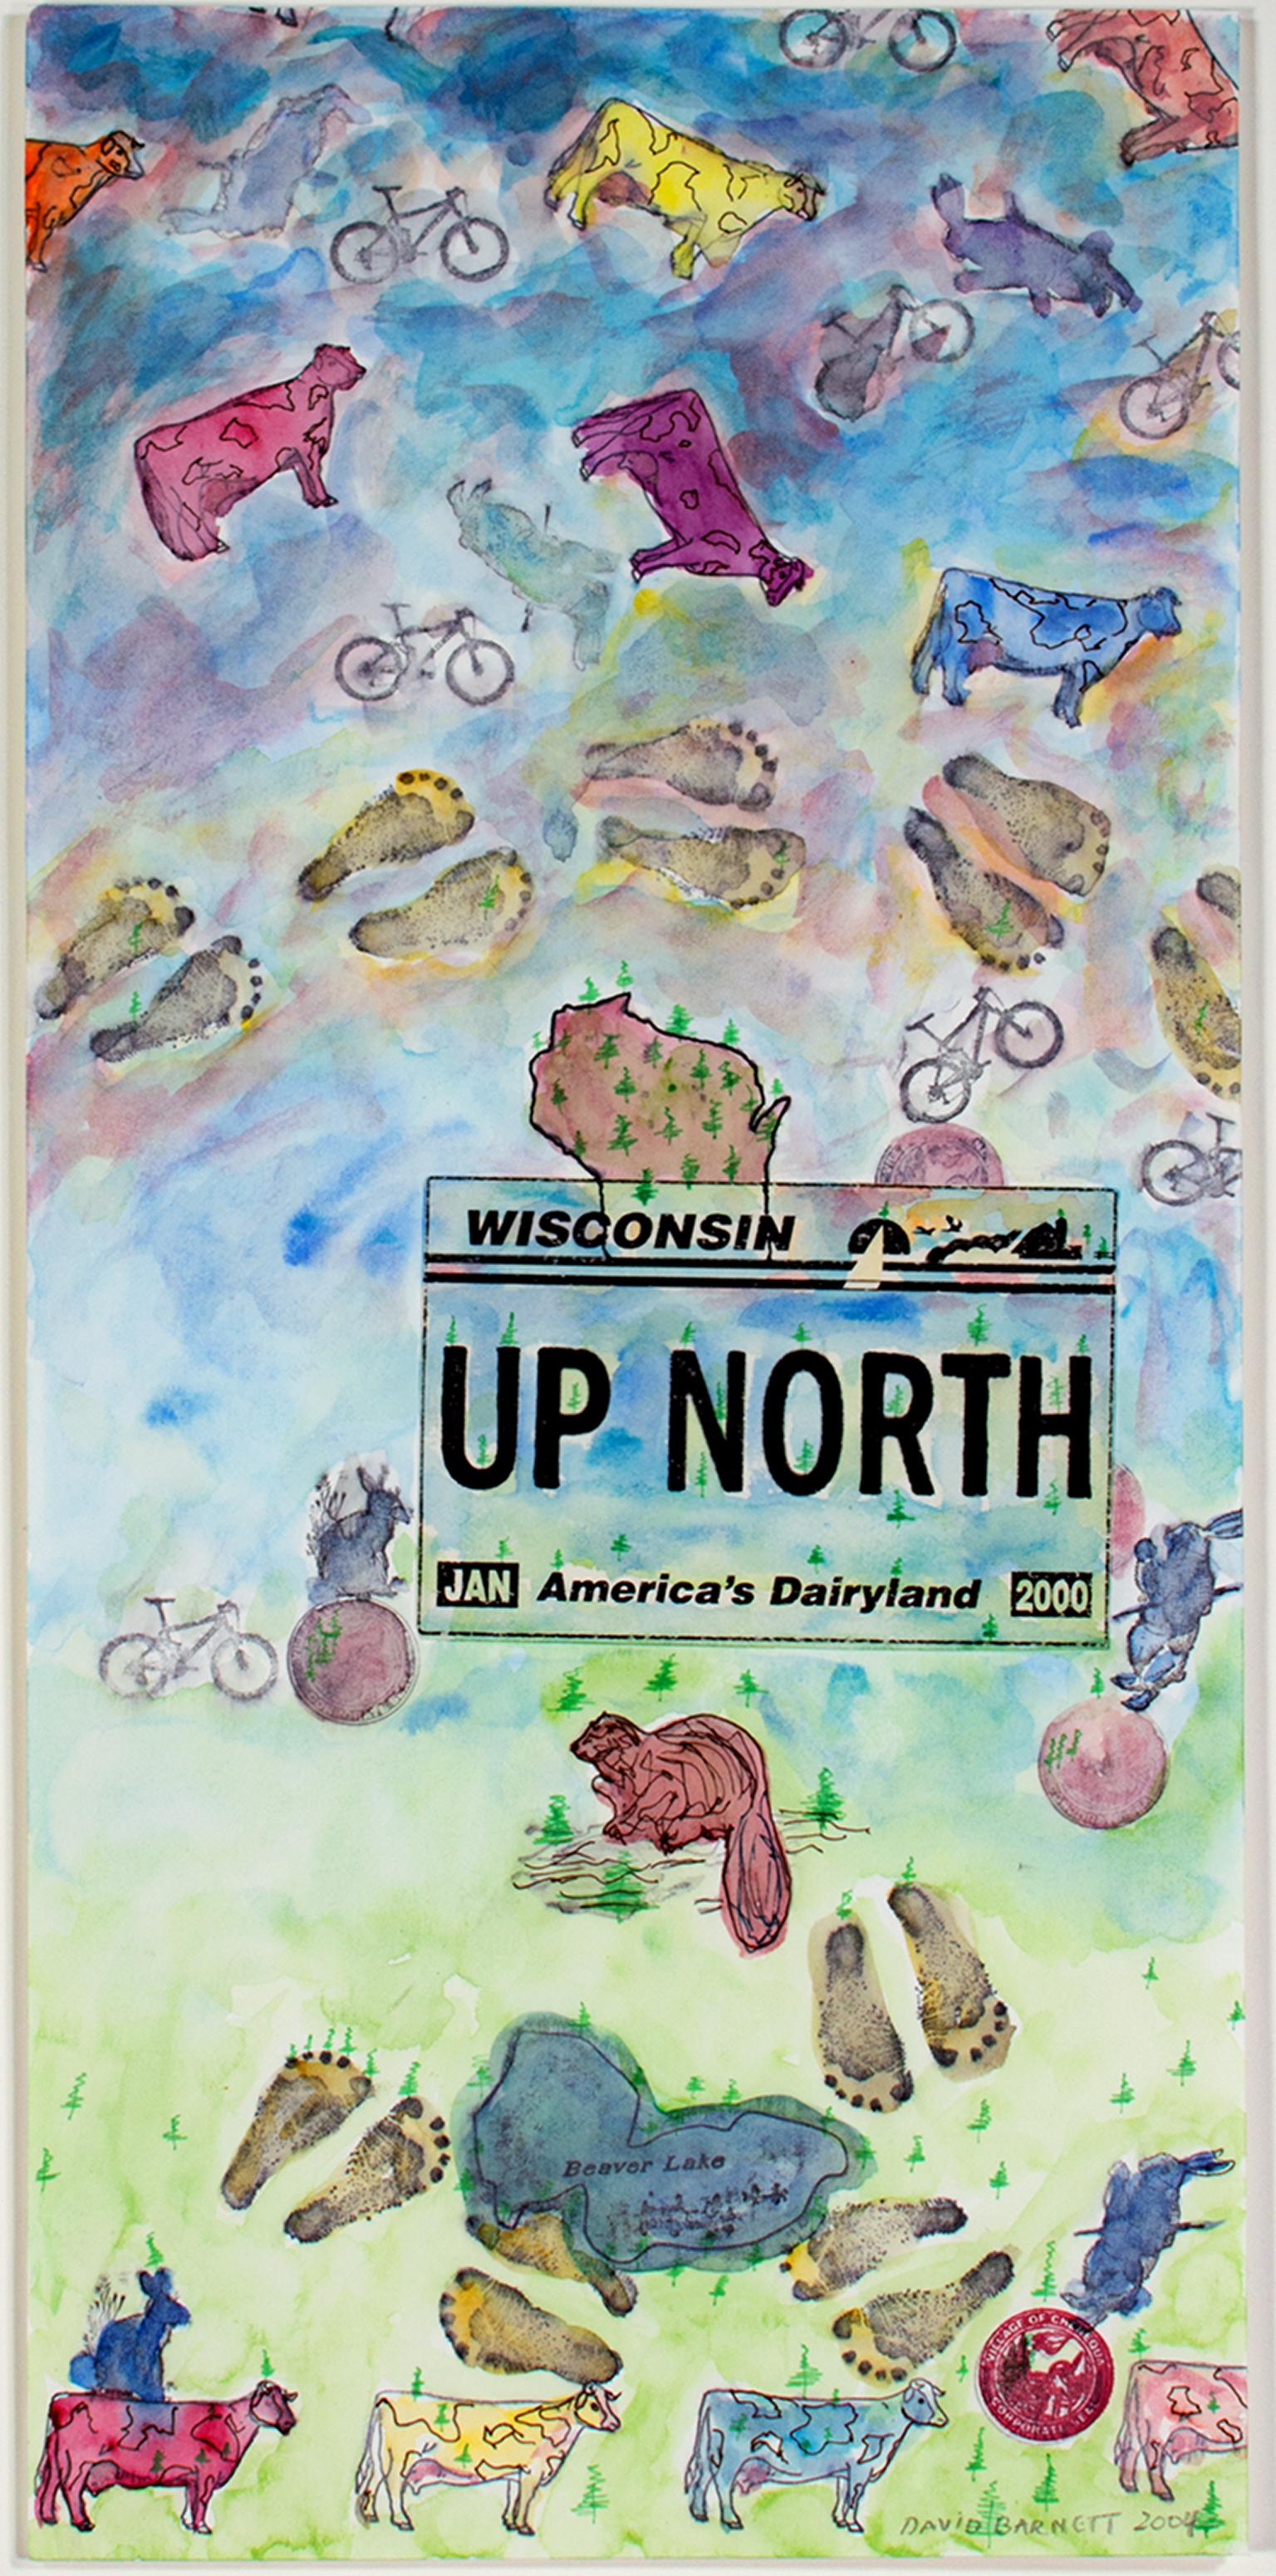 "Up North Series: Think Forests, Think Trees, or Dos Vacas Sin Cabezas" is an original ink and watercolor painting by David Barnett, signed in the lower right. It features a Wisconsin license plate that reads "UP NORTH" on an abstract landscape.